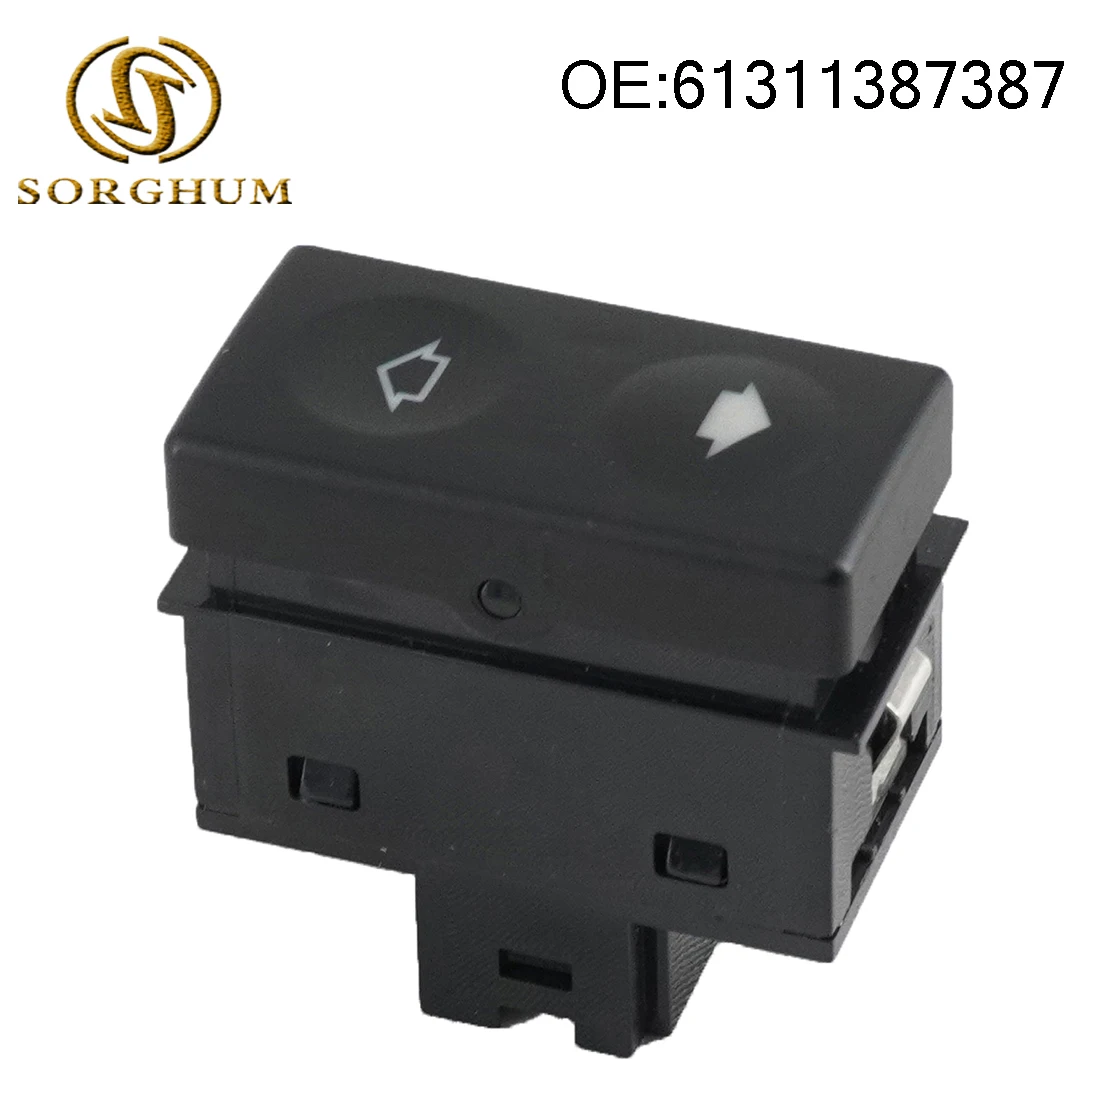 

Sorghum Black Electric Power Window Control Switch Regulator Button For BMW E36 318i 318is 325i 325is 61311387387 613 1138 7387